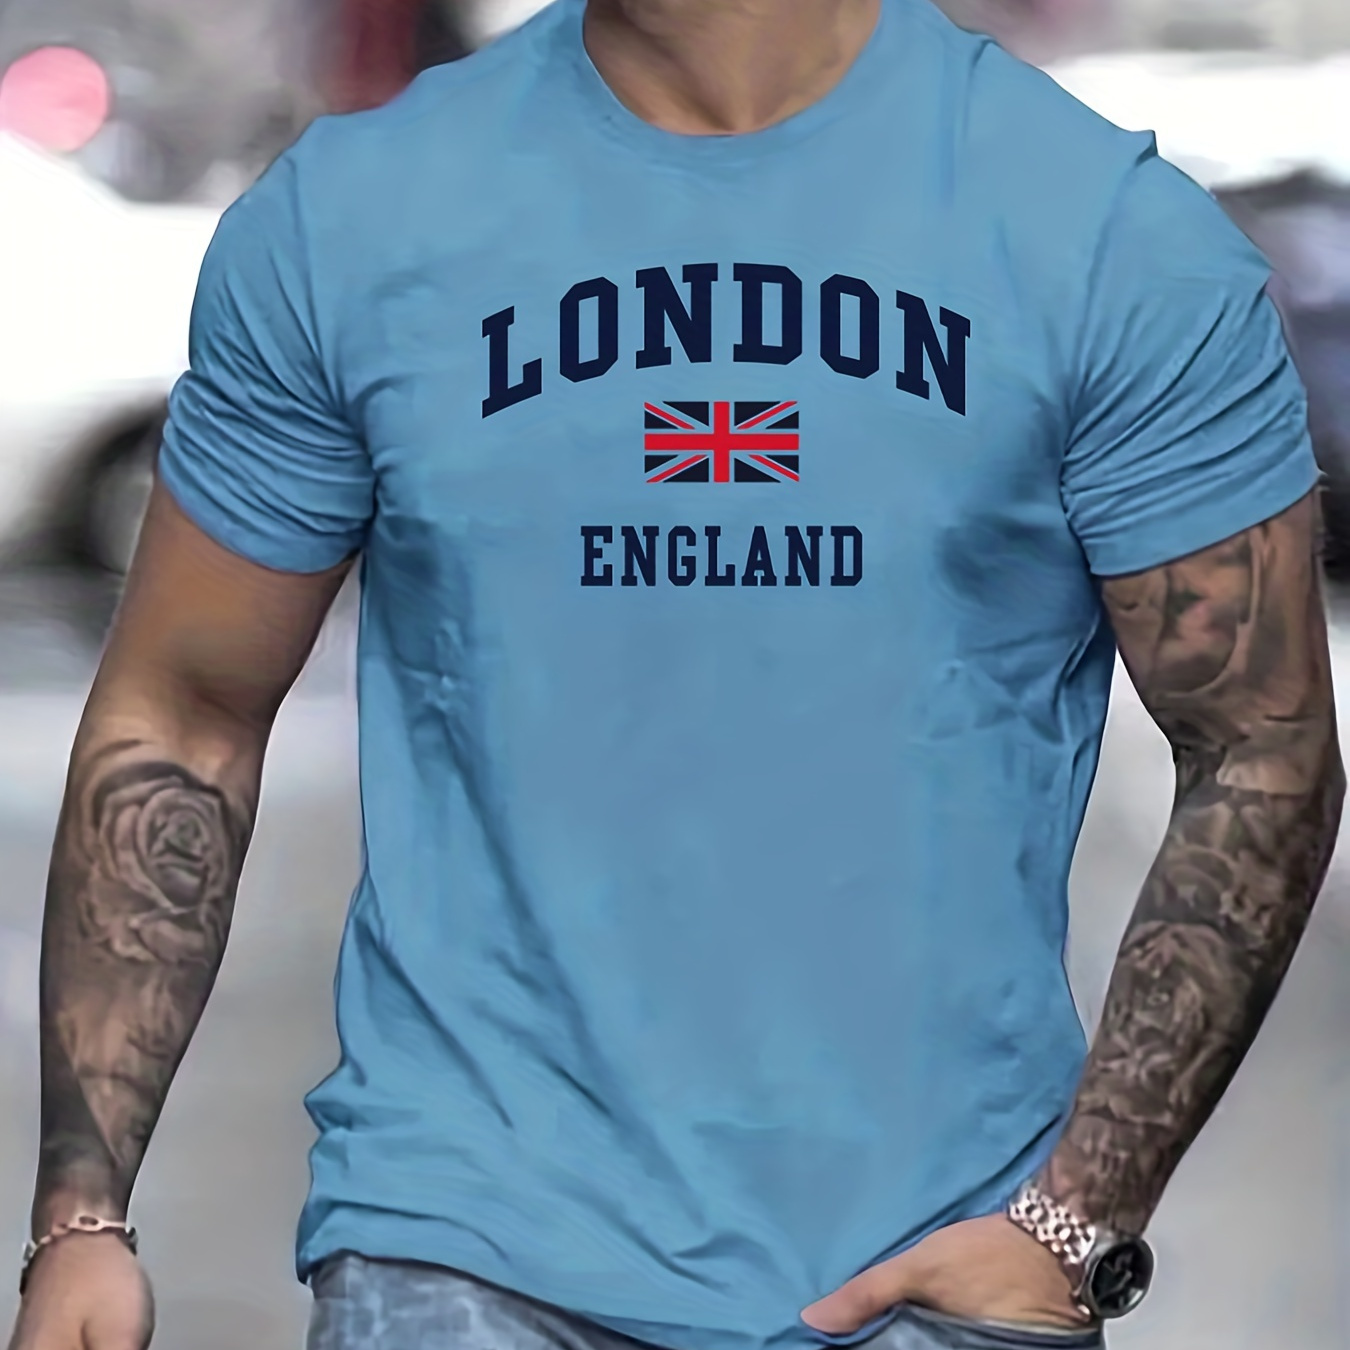 

London England With Flag Pattern Men's T-shirt For Summer Outdoor, Men's Retro Crew Neck Tops